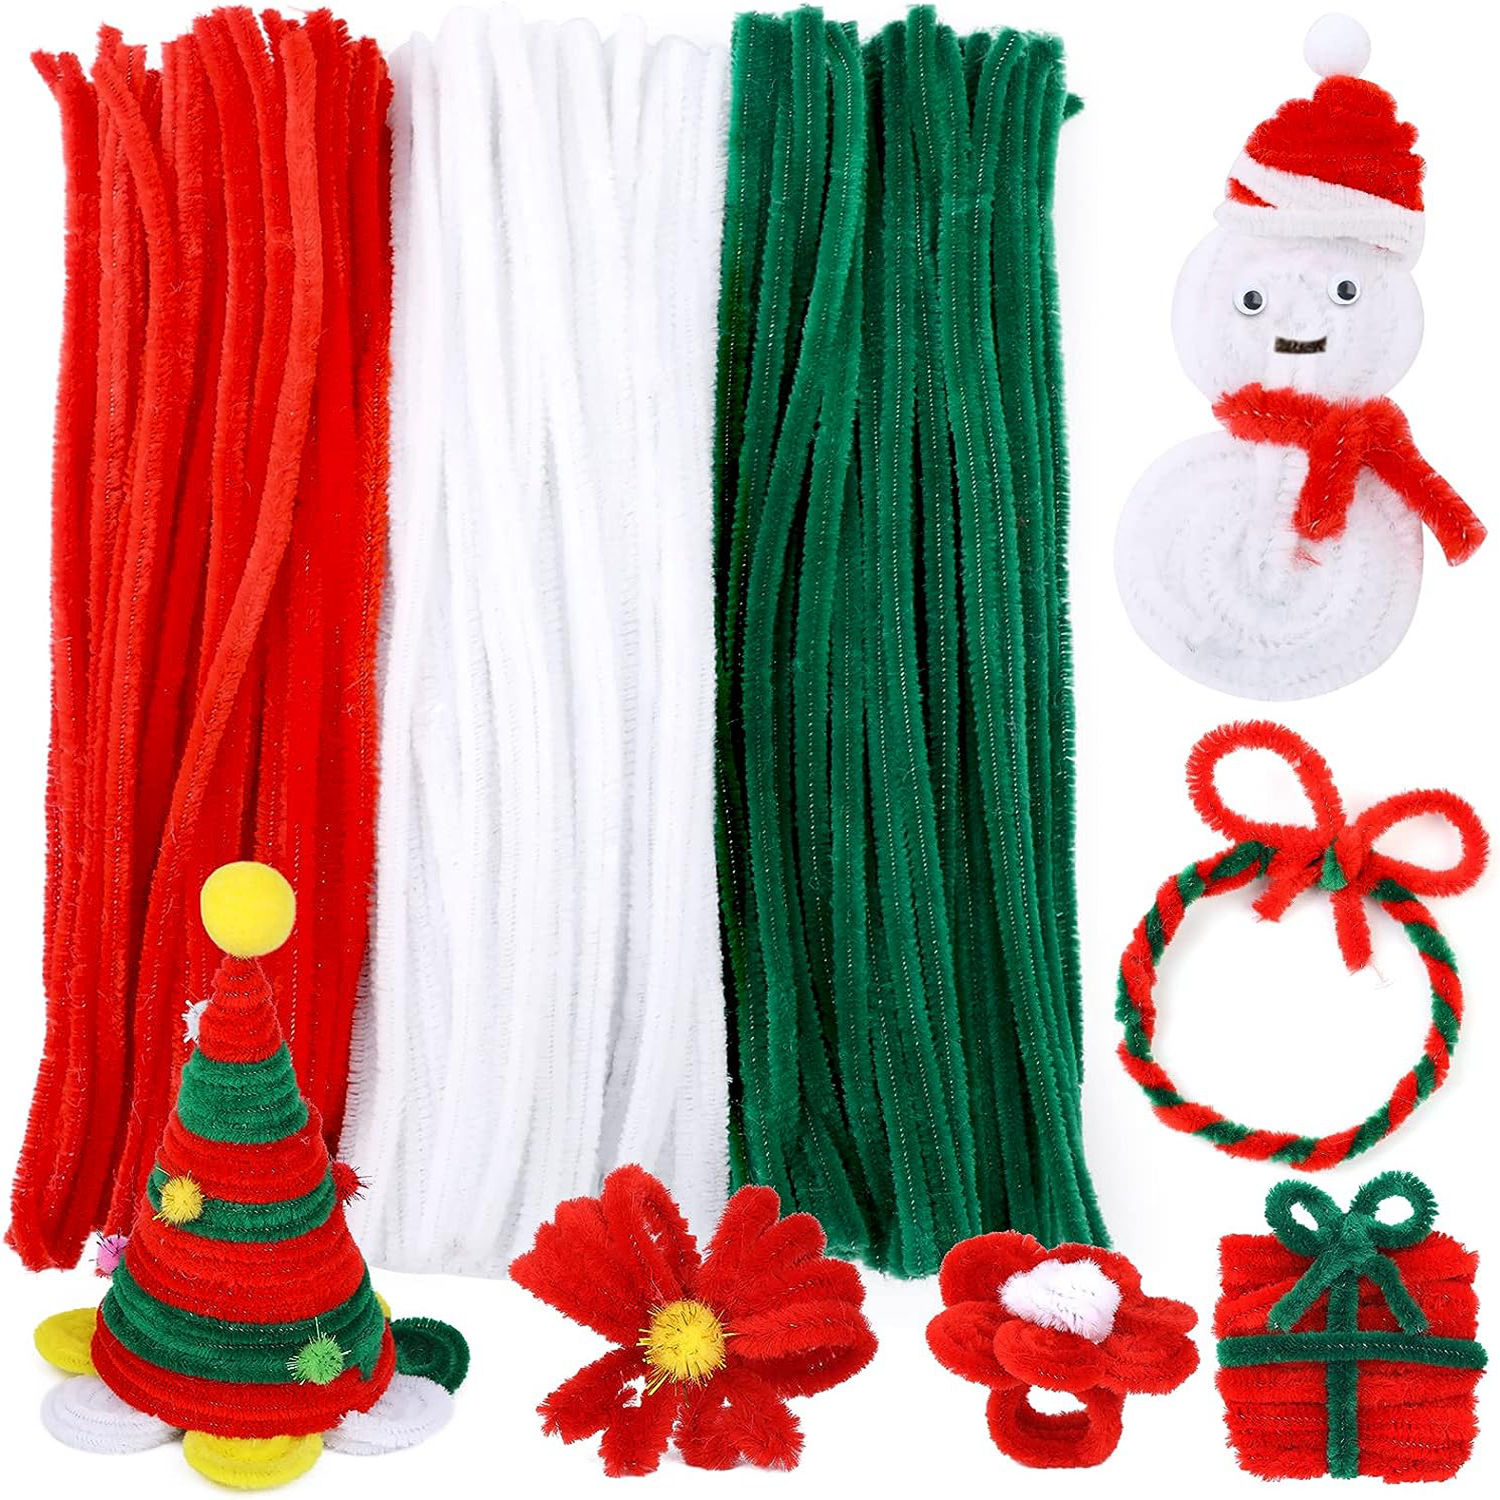 Pipe Cleaners Craft Supplies - 300Pcs 10 Colors Glitter Pipe Cleaners  Chenille S